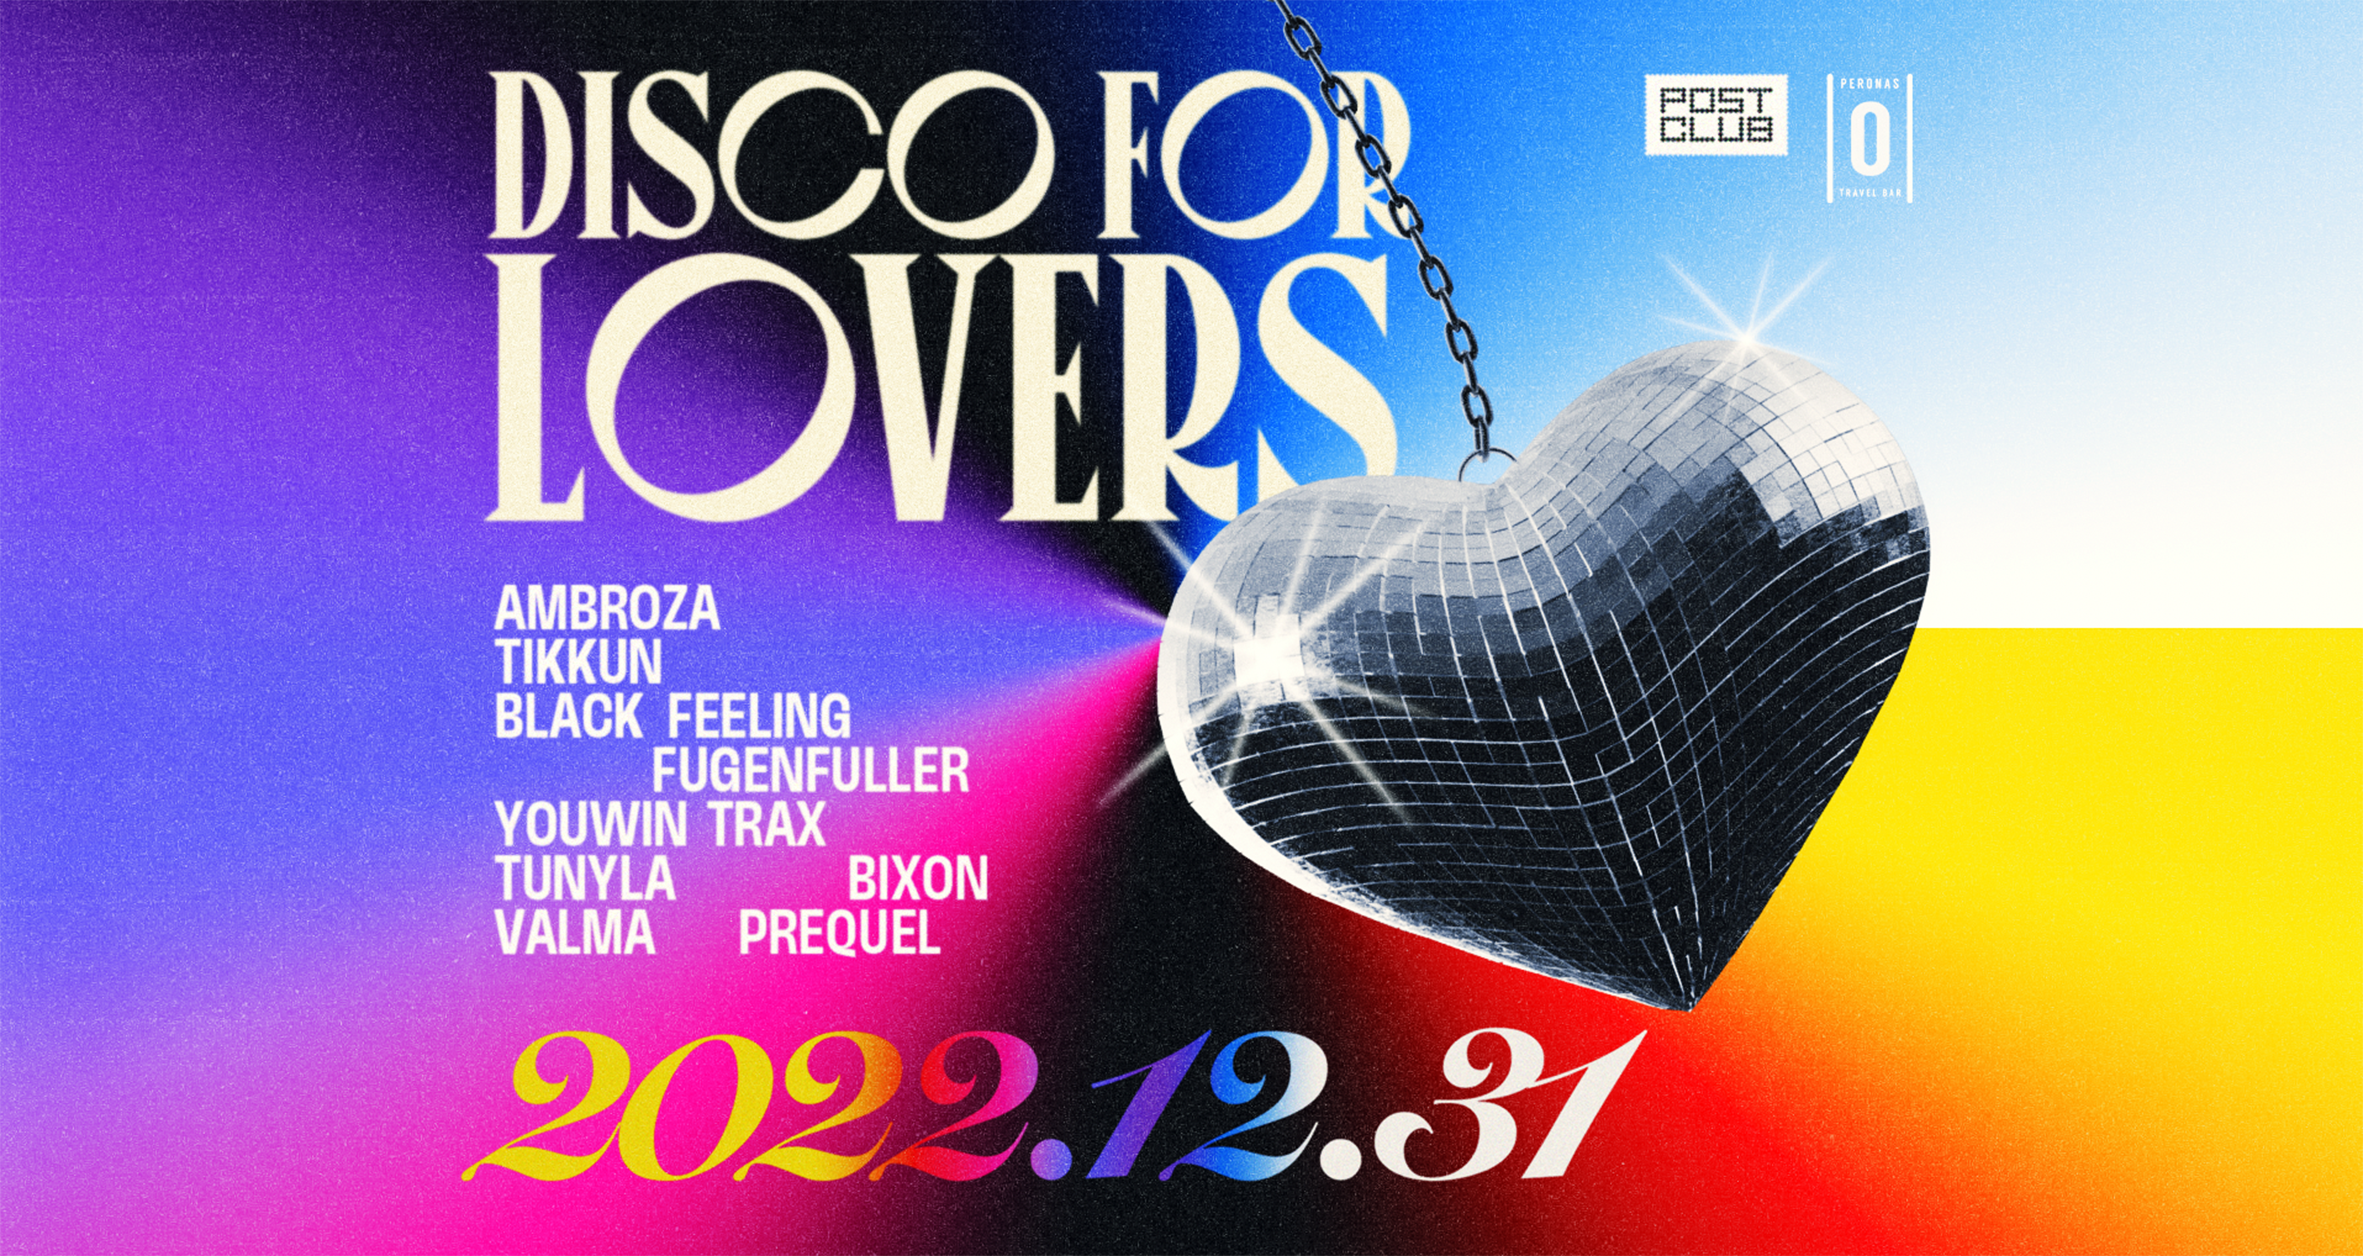 2023: Disco For Lovers NYE - Página frontal